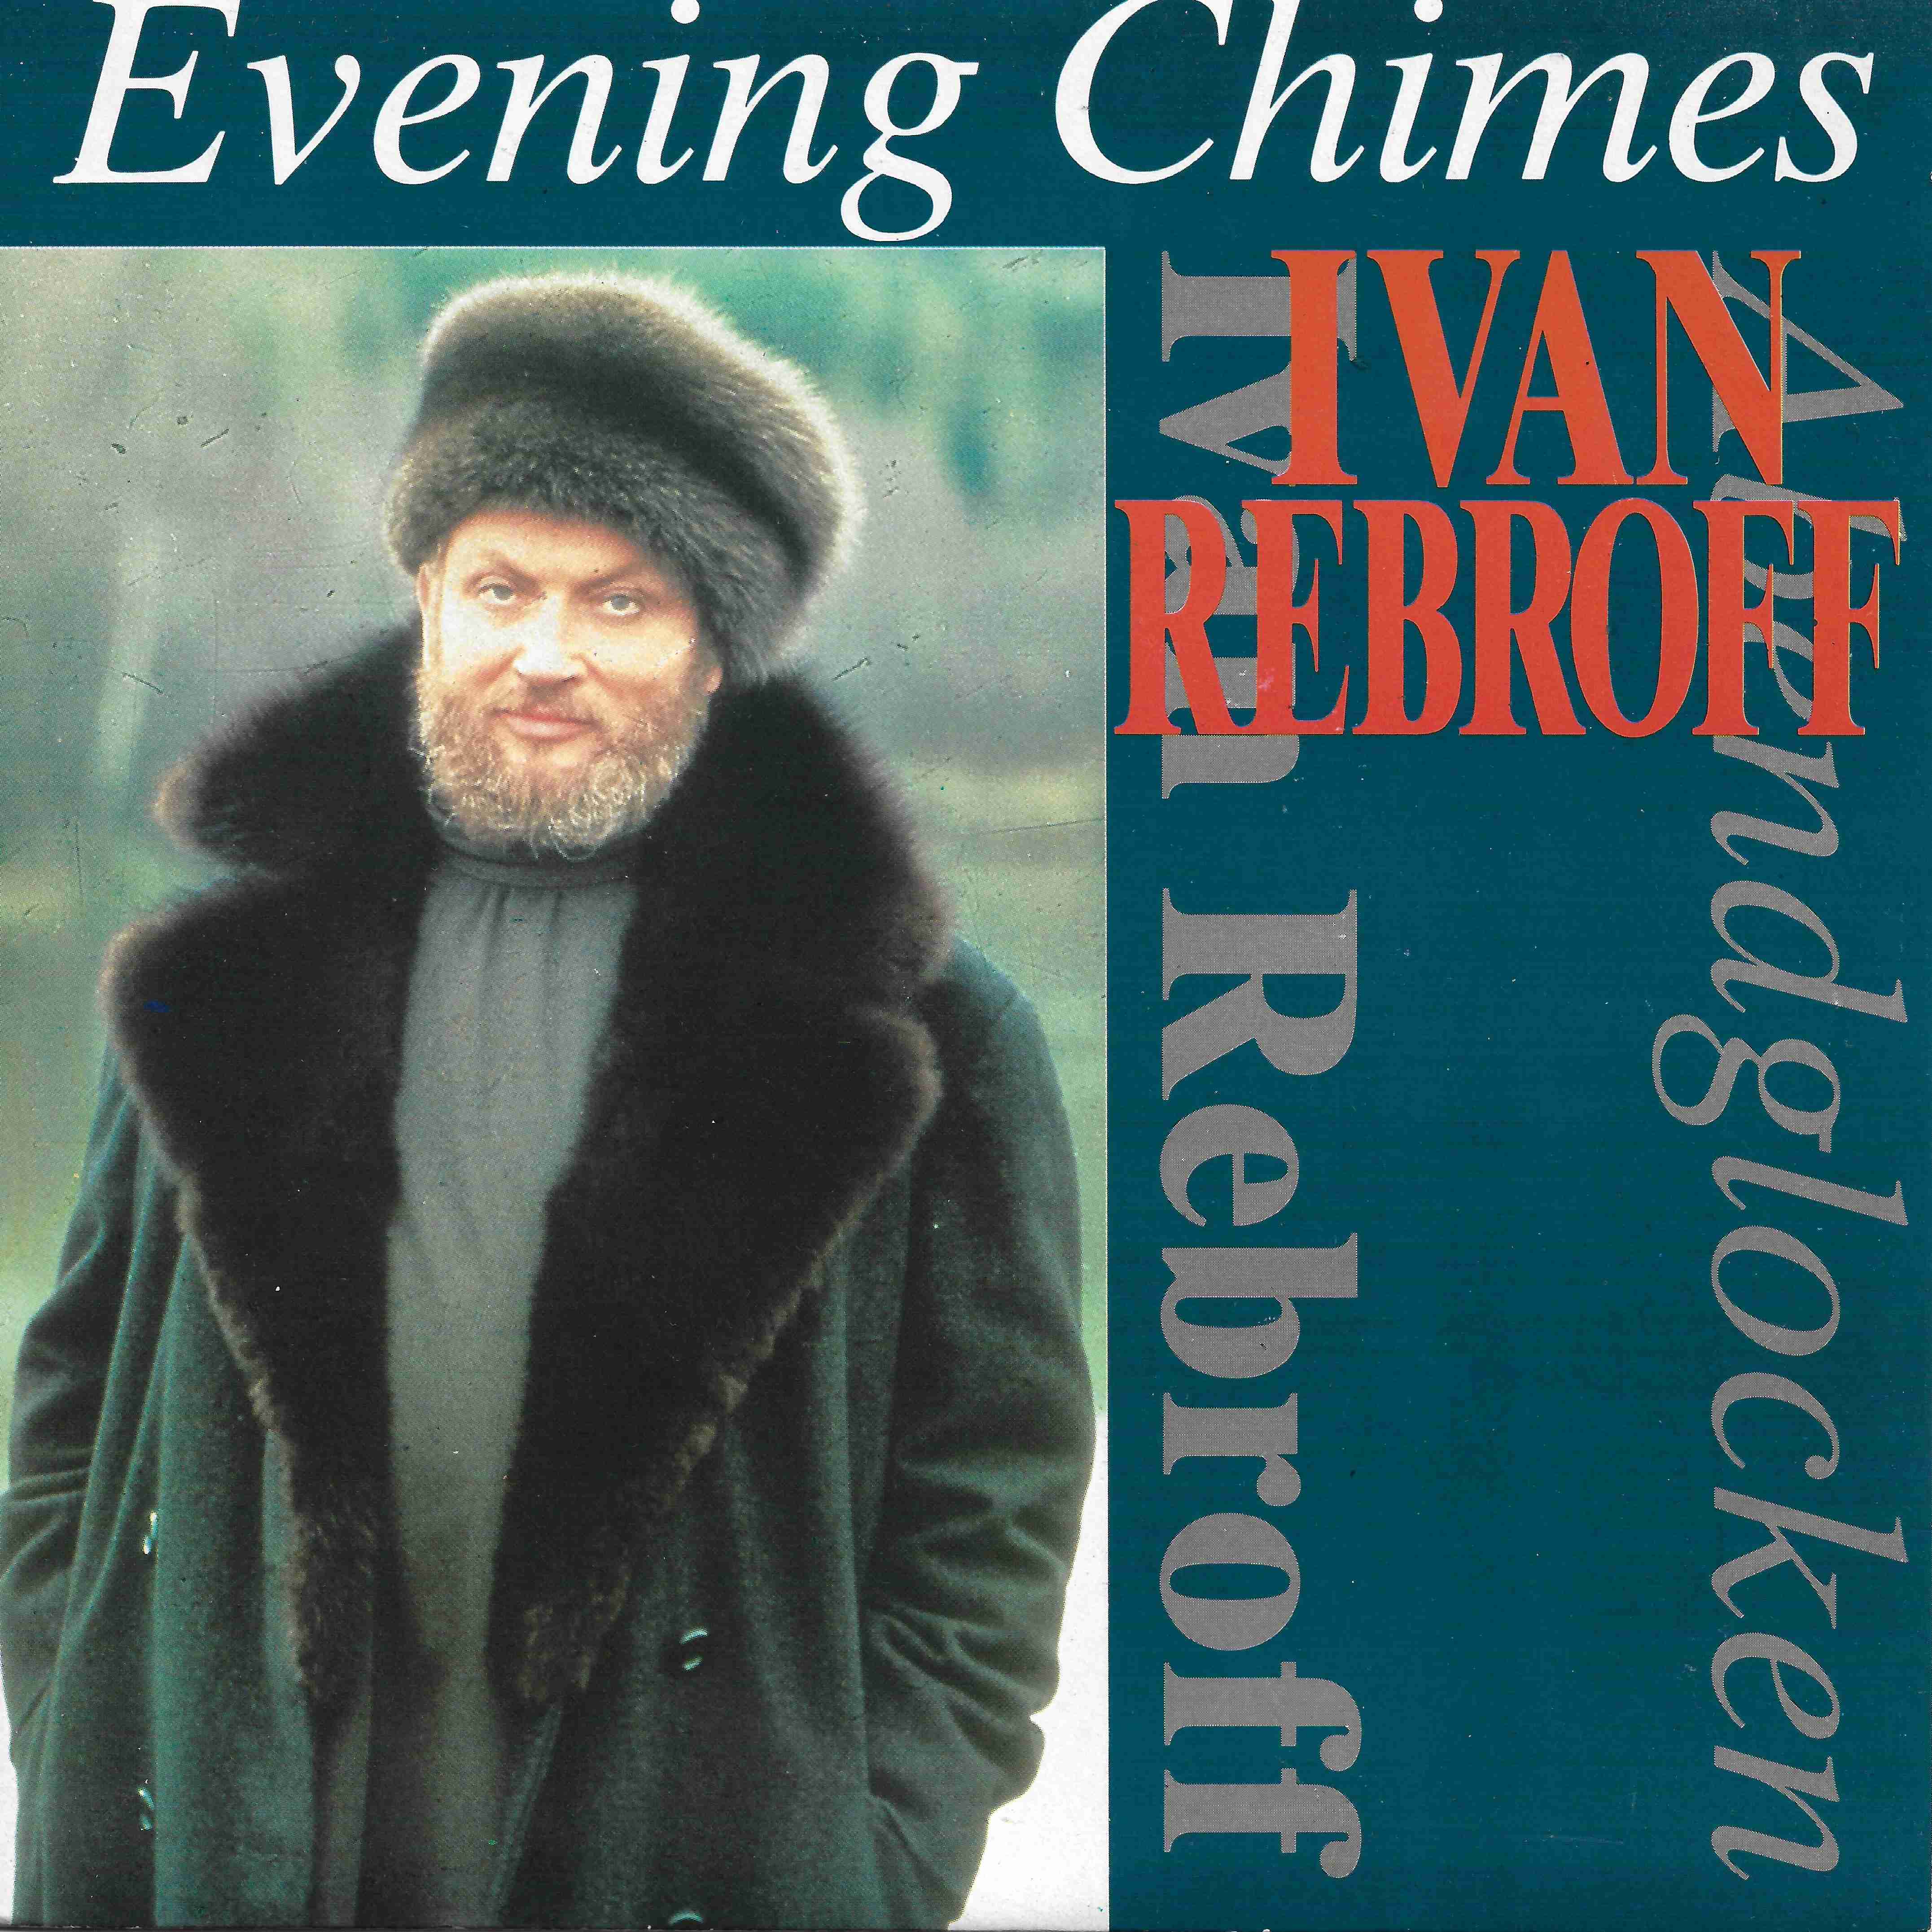 Picture of RESL 243 Evening chimes (Abendglocken) by artist Arr. Ivan Rebroff from the BBC singles - Records and Tapes library